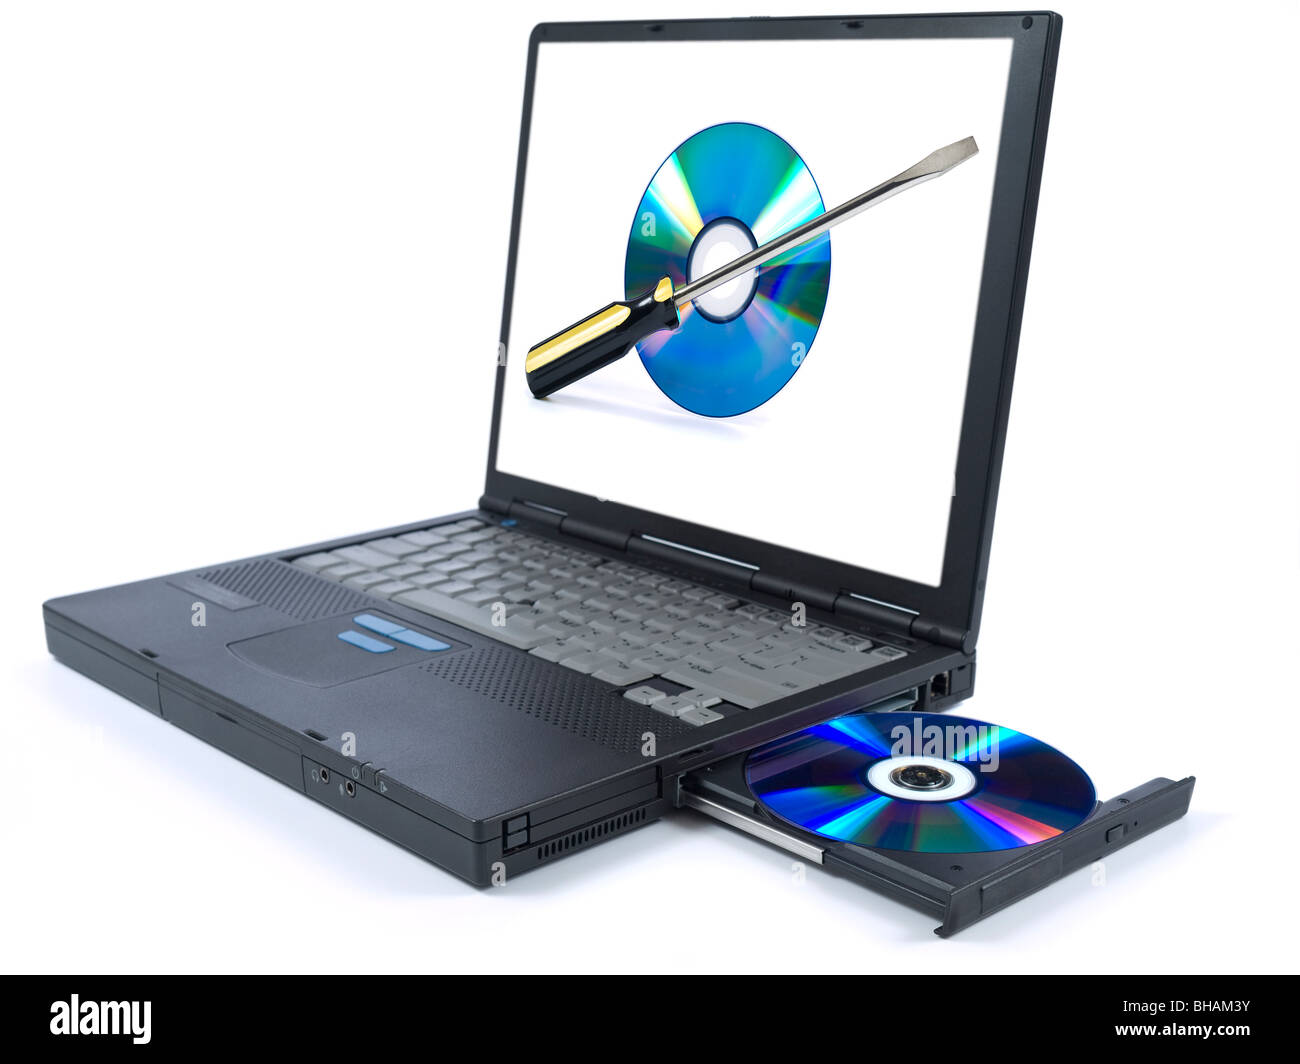 Isolated black laptop with a DVD in tray and a technical support icon on the screen. Stock Photo